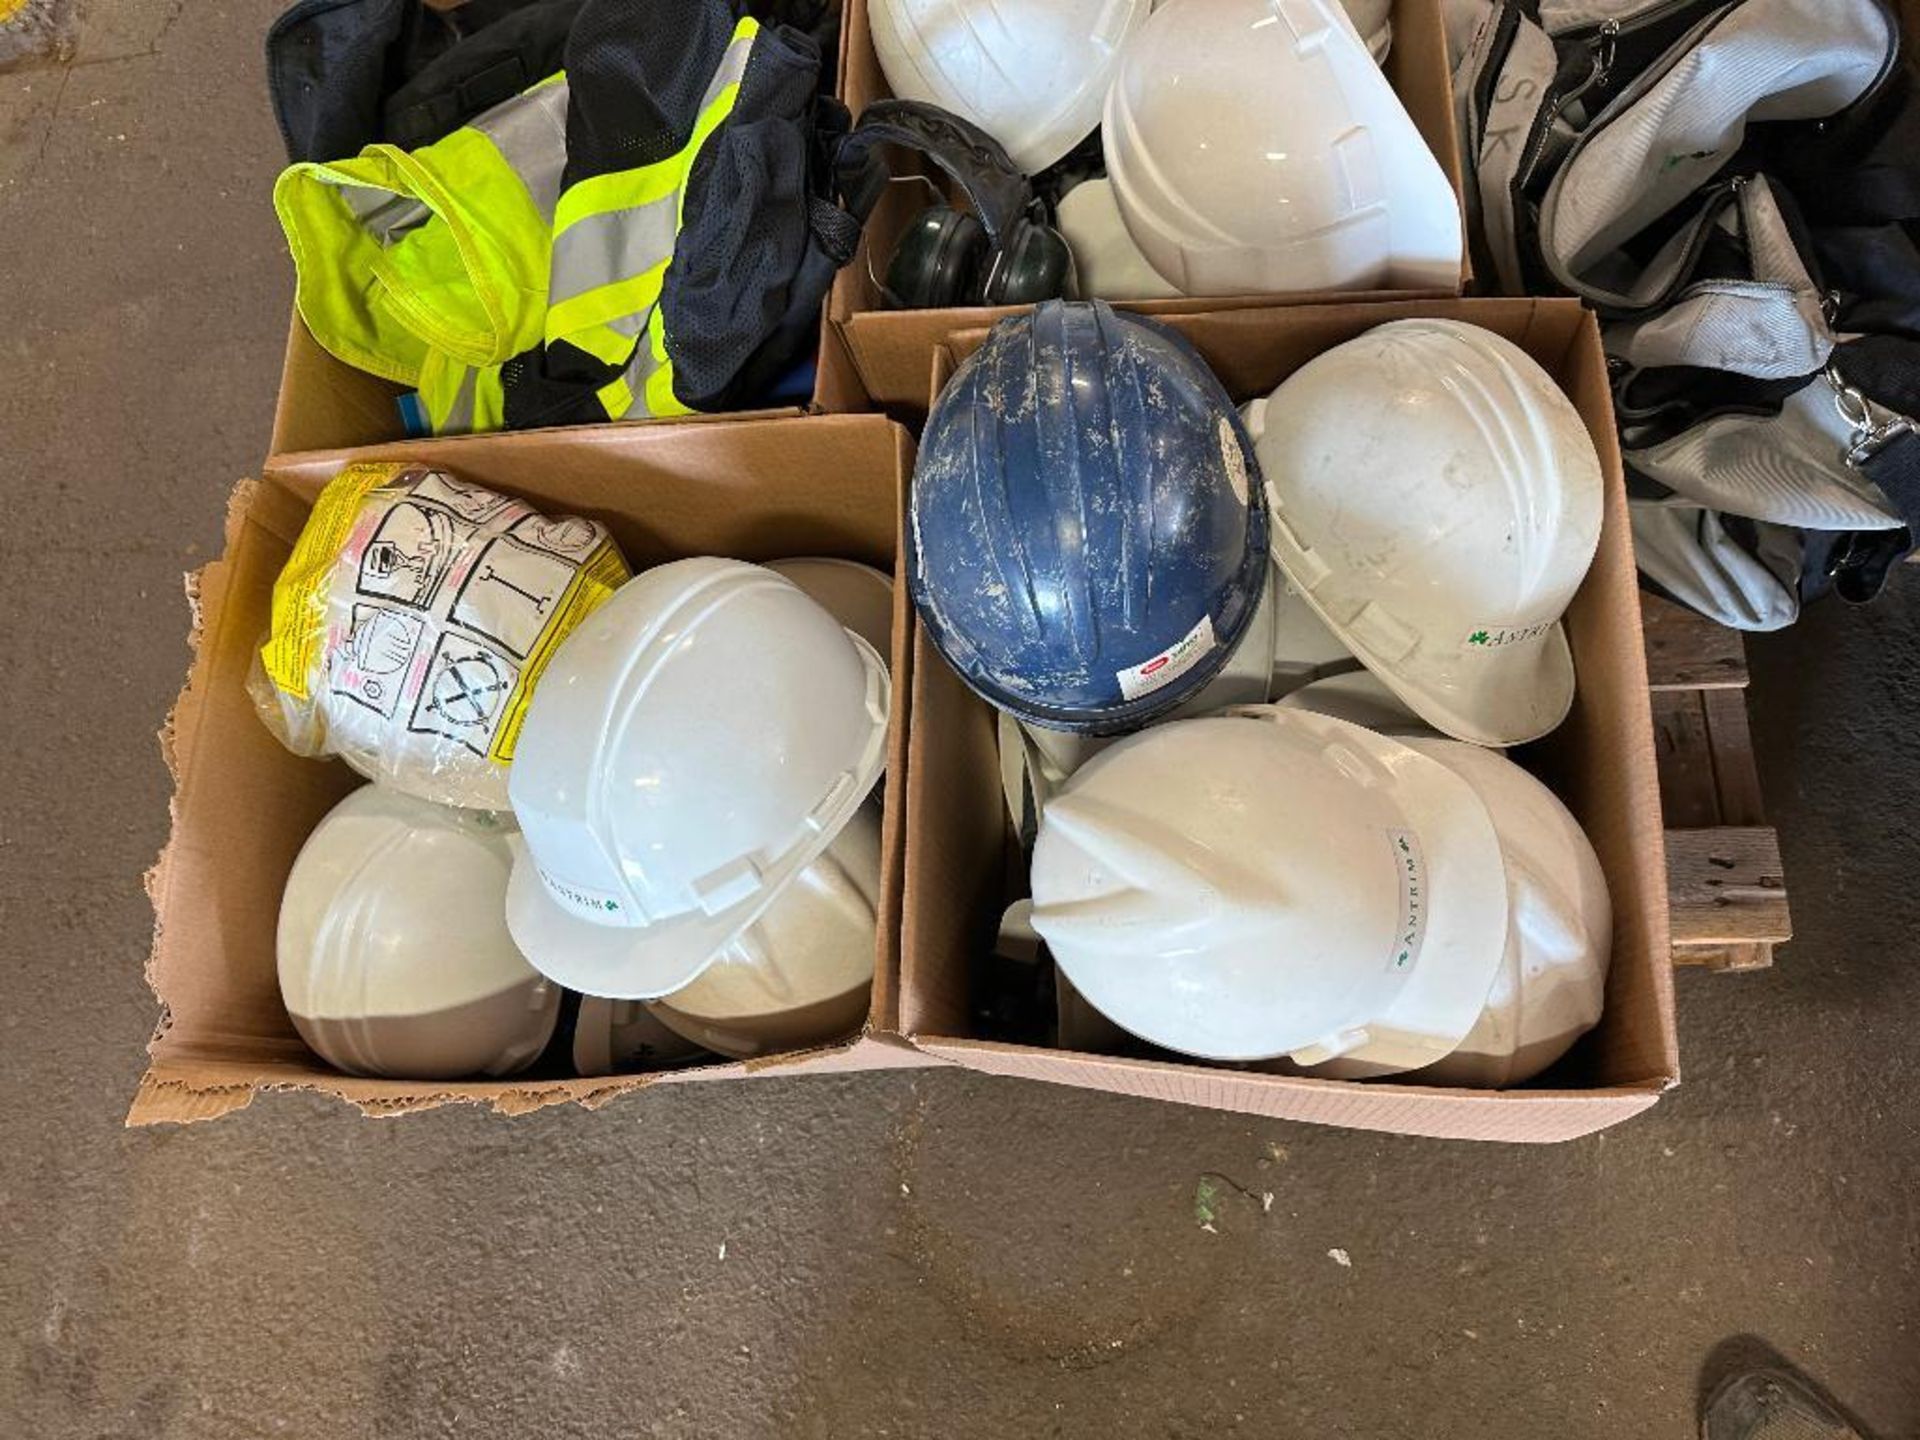 Lot of Asst. Hard Hats, Safety Vests, First Aid Kits, etc. - Image 3 of 4